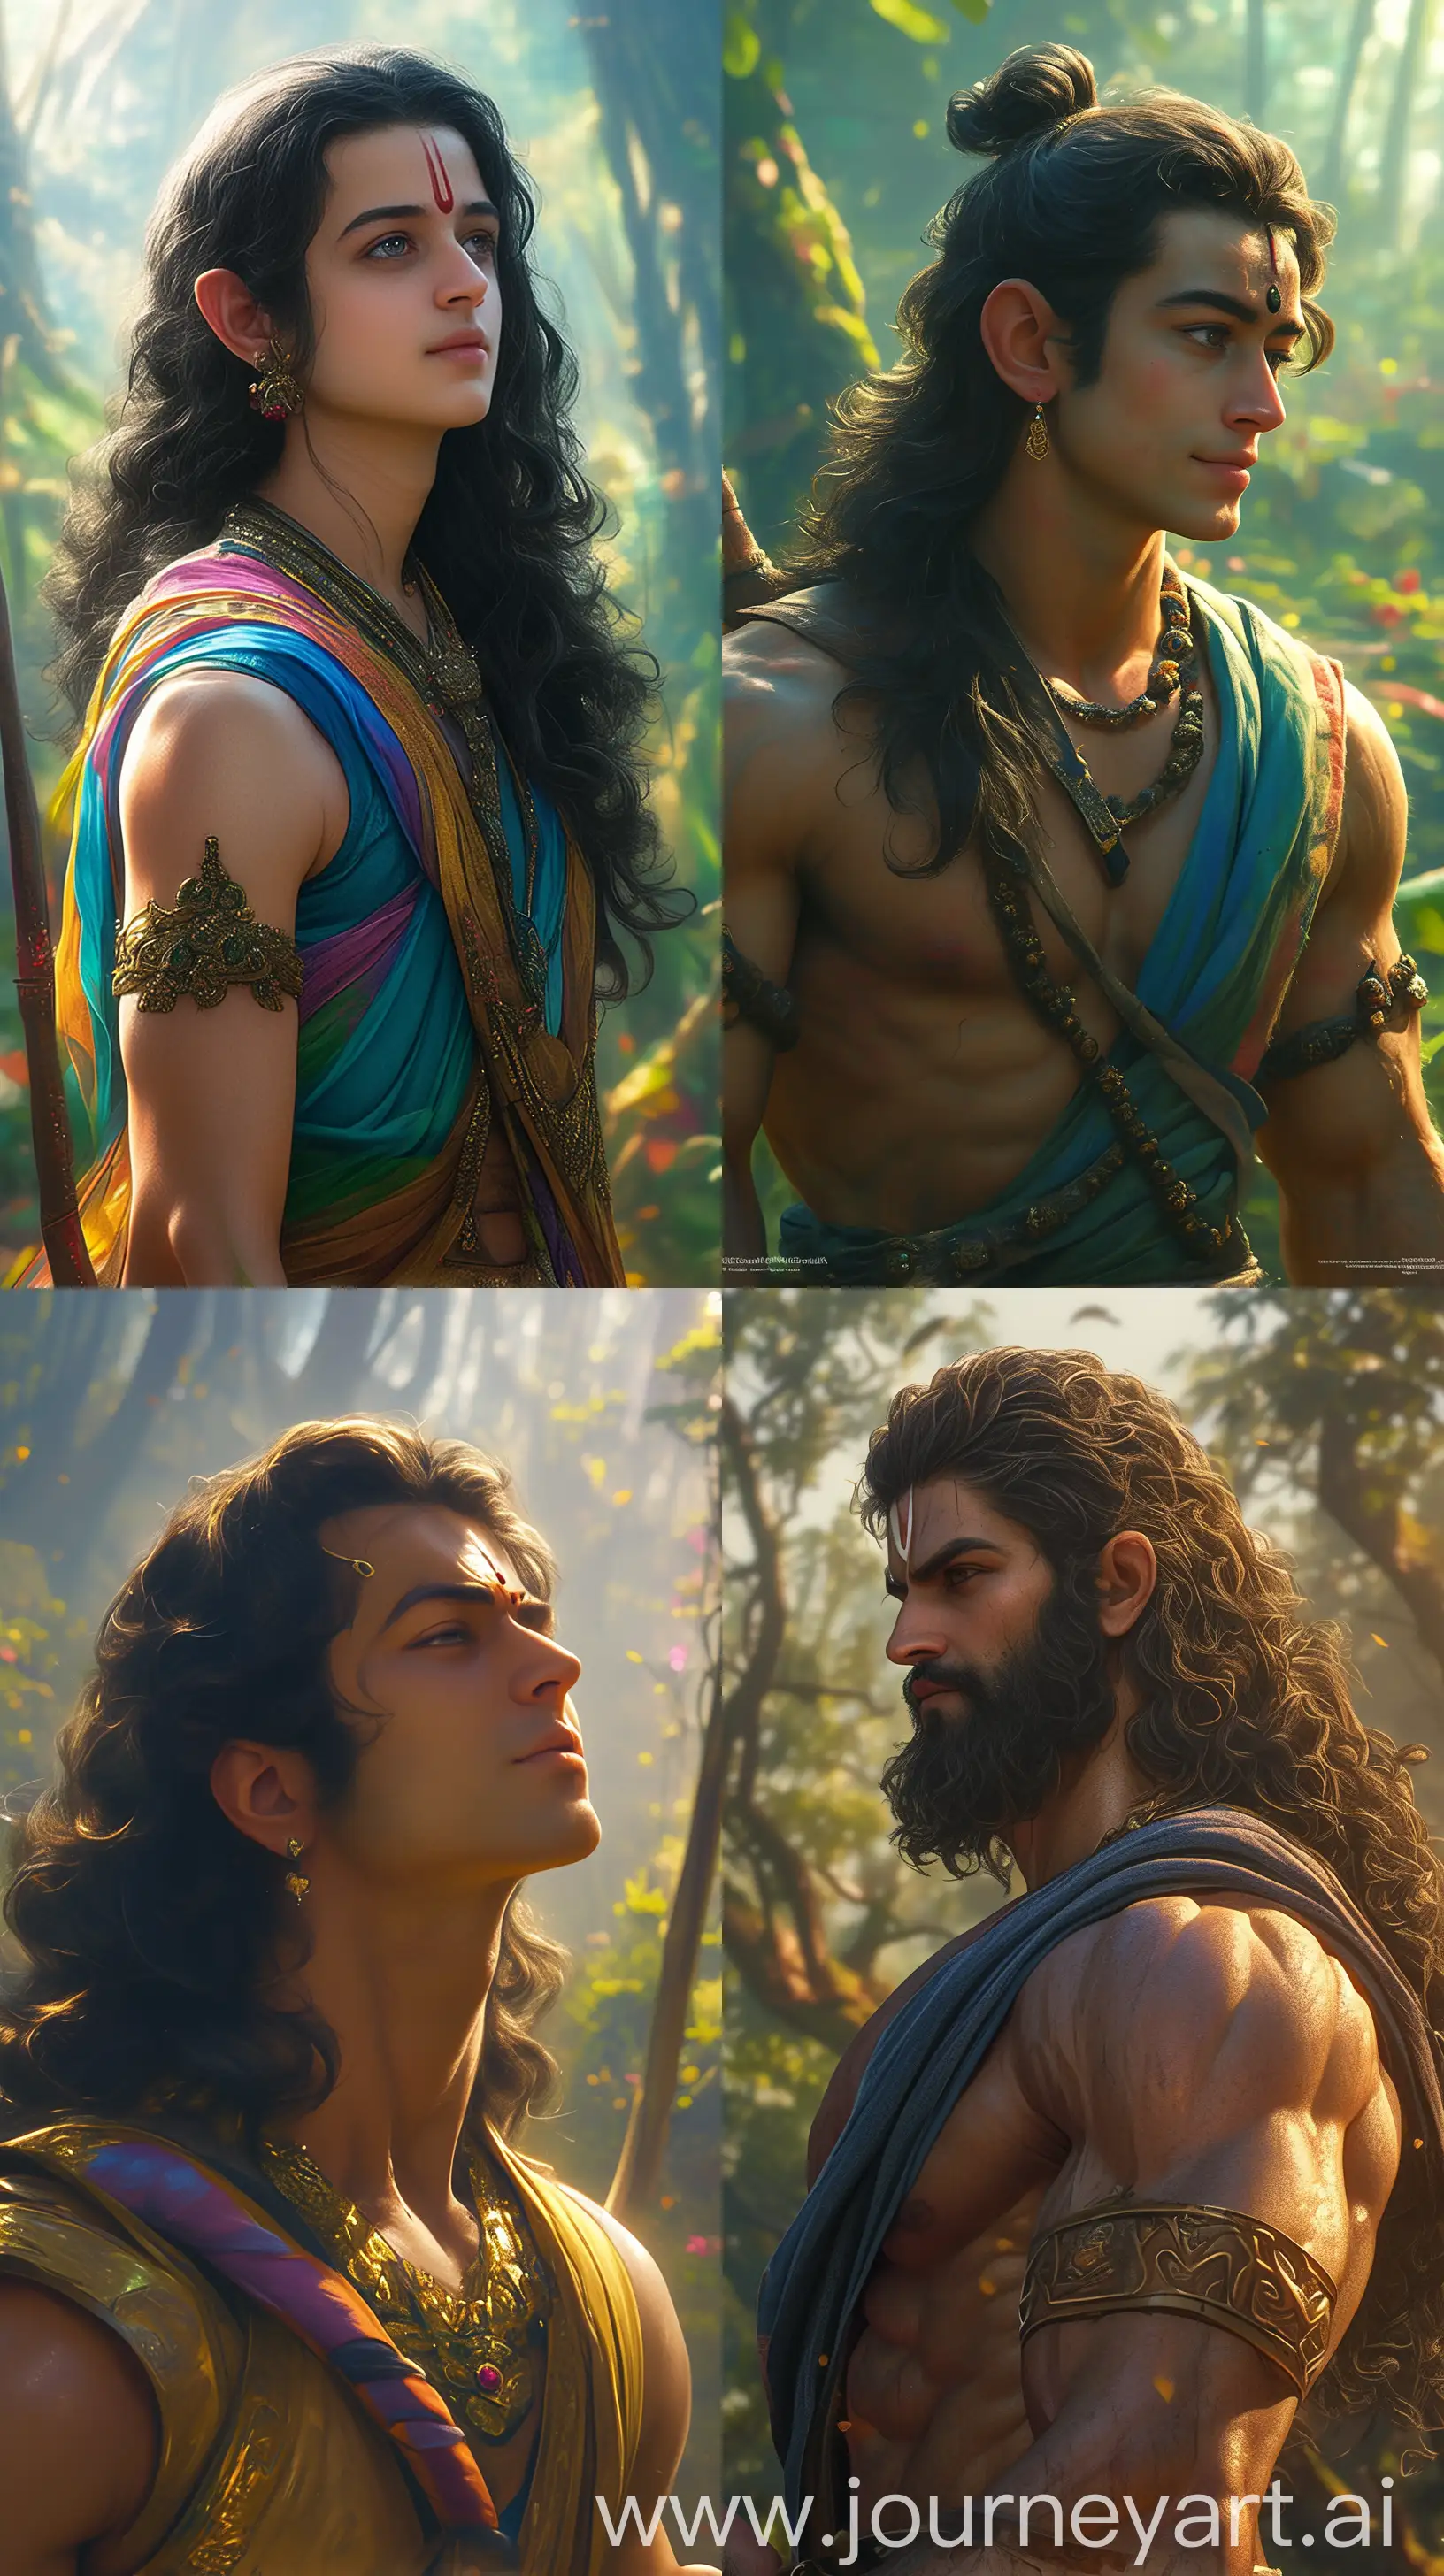 Realistic image of Lord ram around the age of 25, black long hair, clean shaven, seen as if talking with someone, forest background, intricate details, close-up image, traditional Hindu style, 8k quality --s 400 --ar 9:16 --niji 6